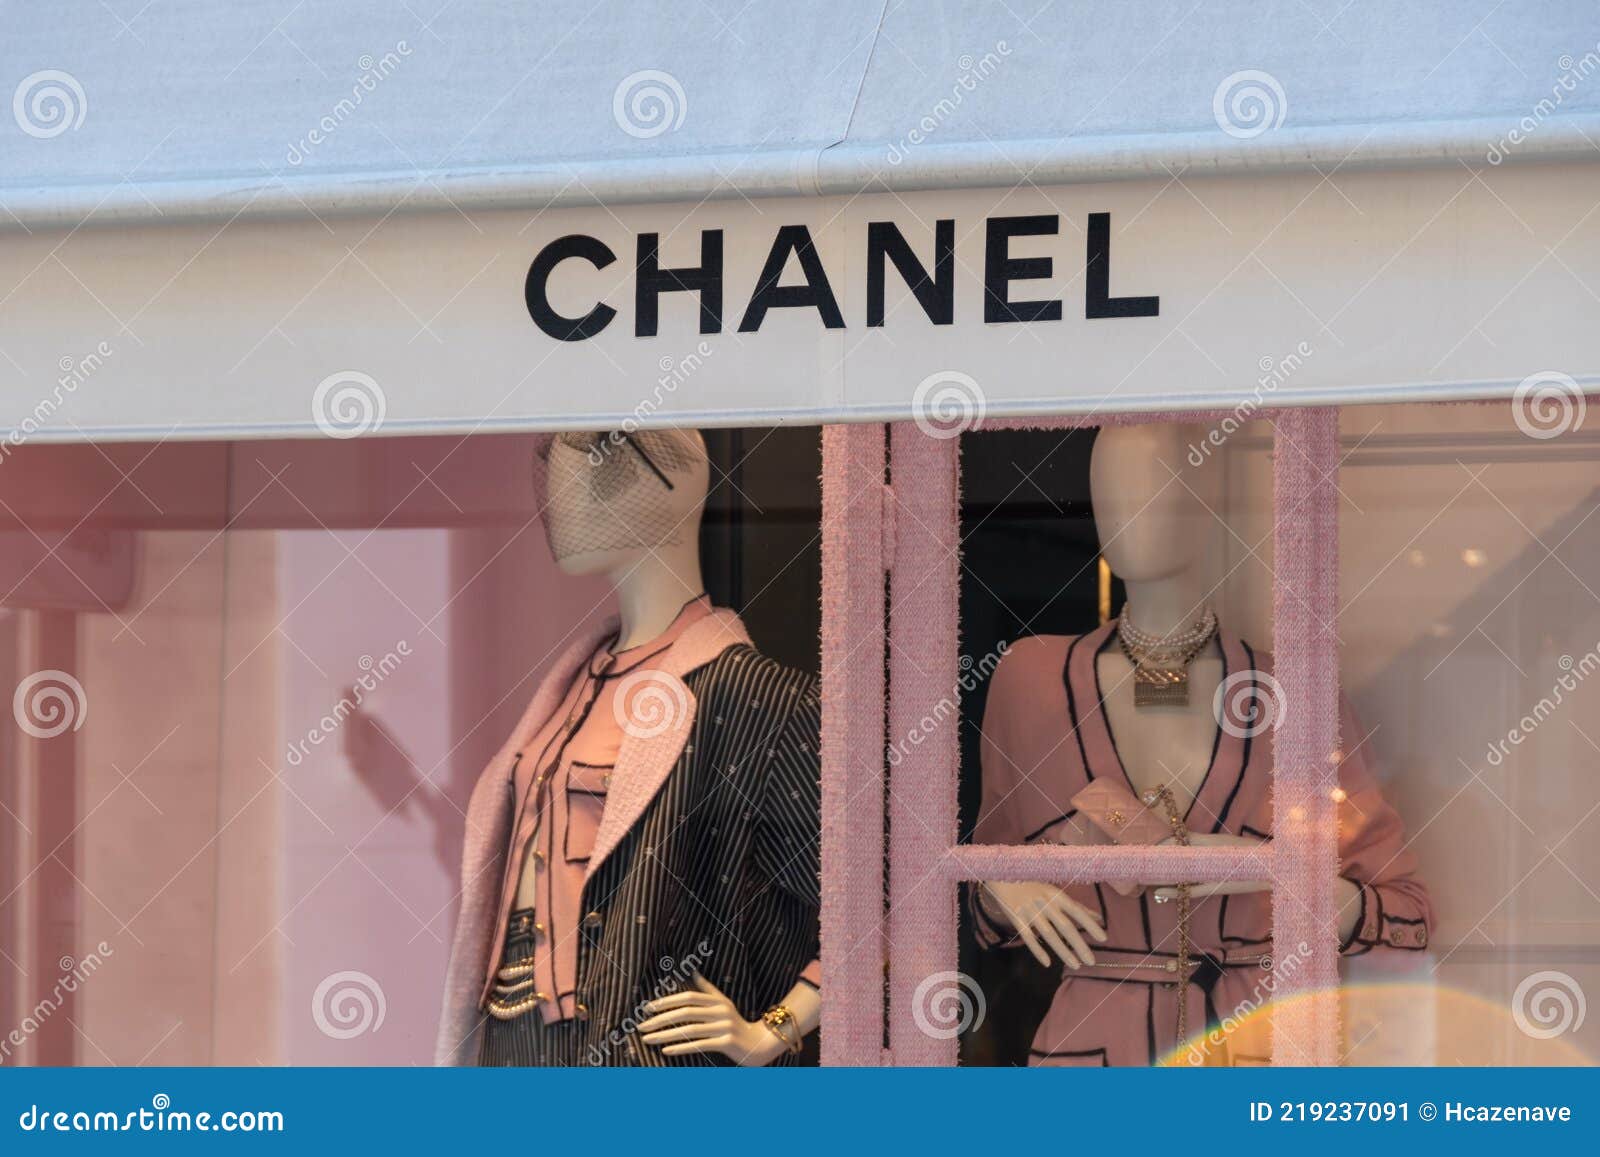 Exterior View of the Historic Chanel Store, Rue Cambon, Paris, France ...